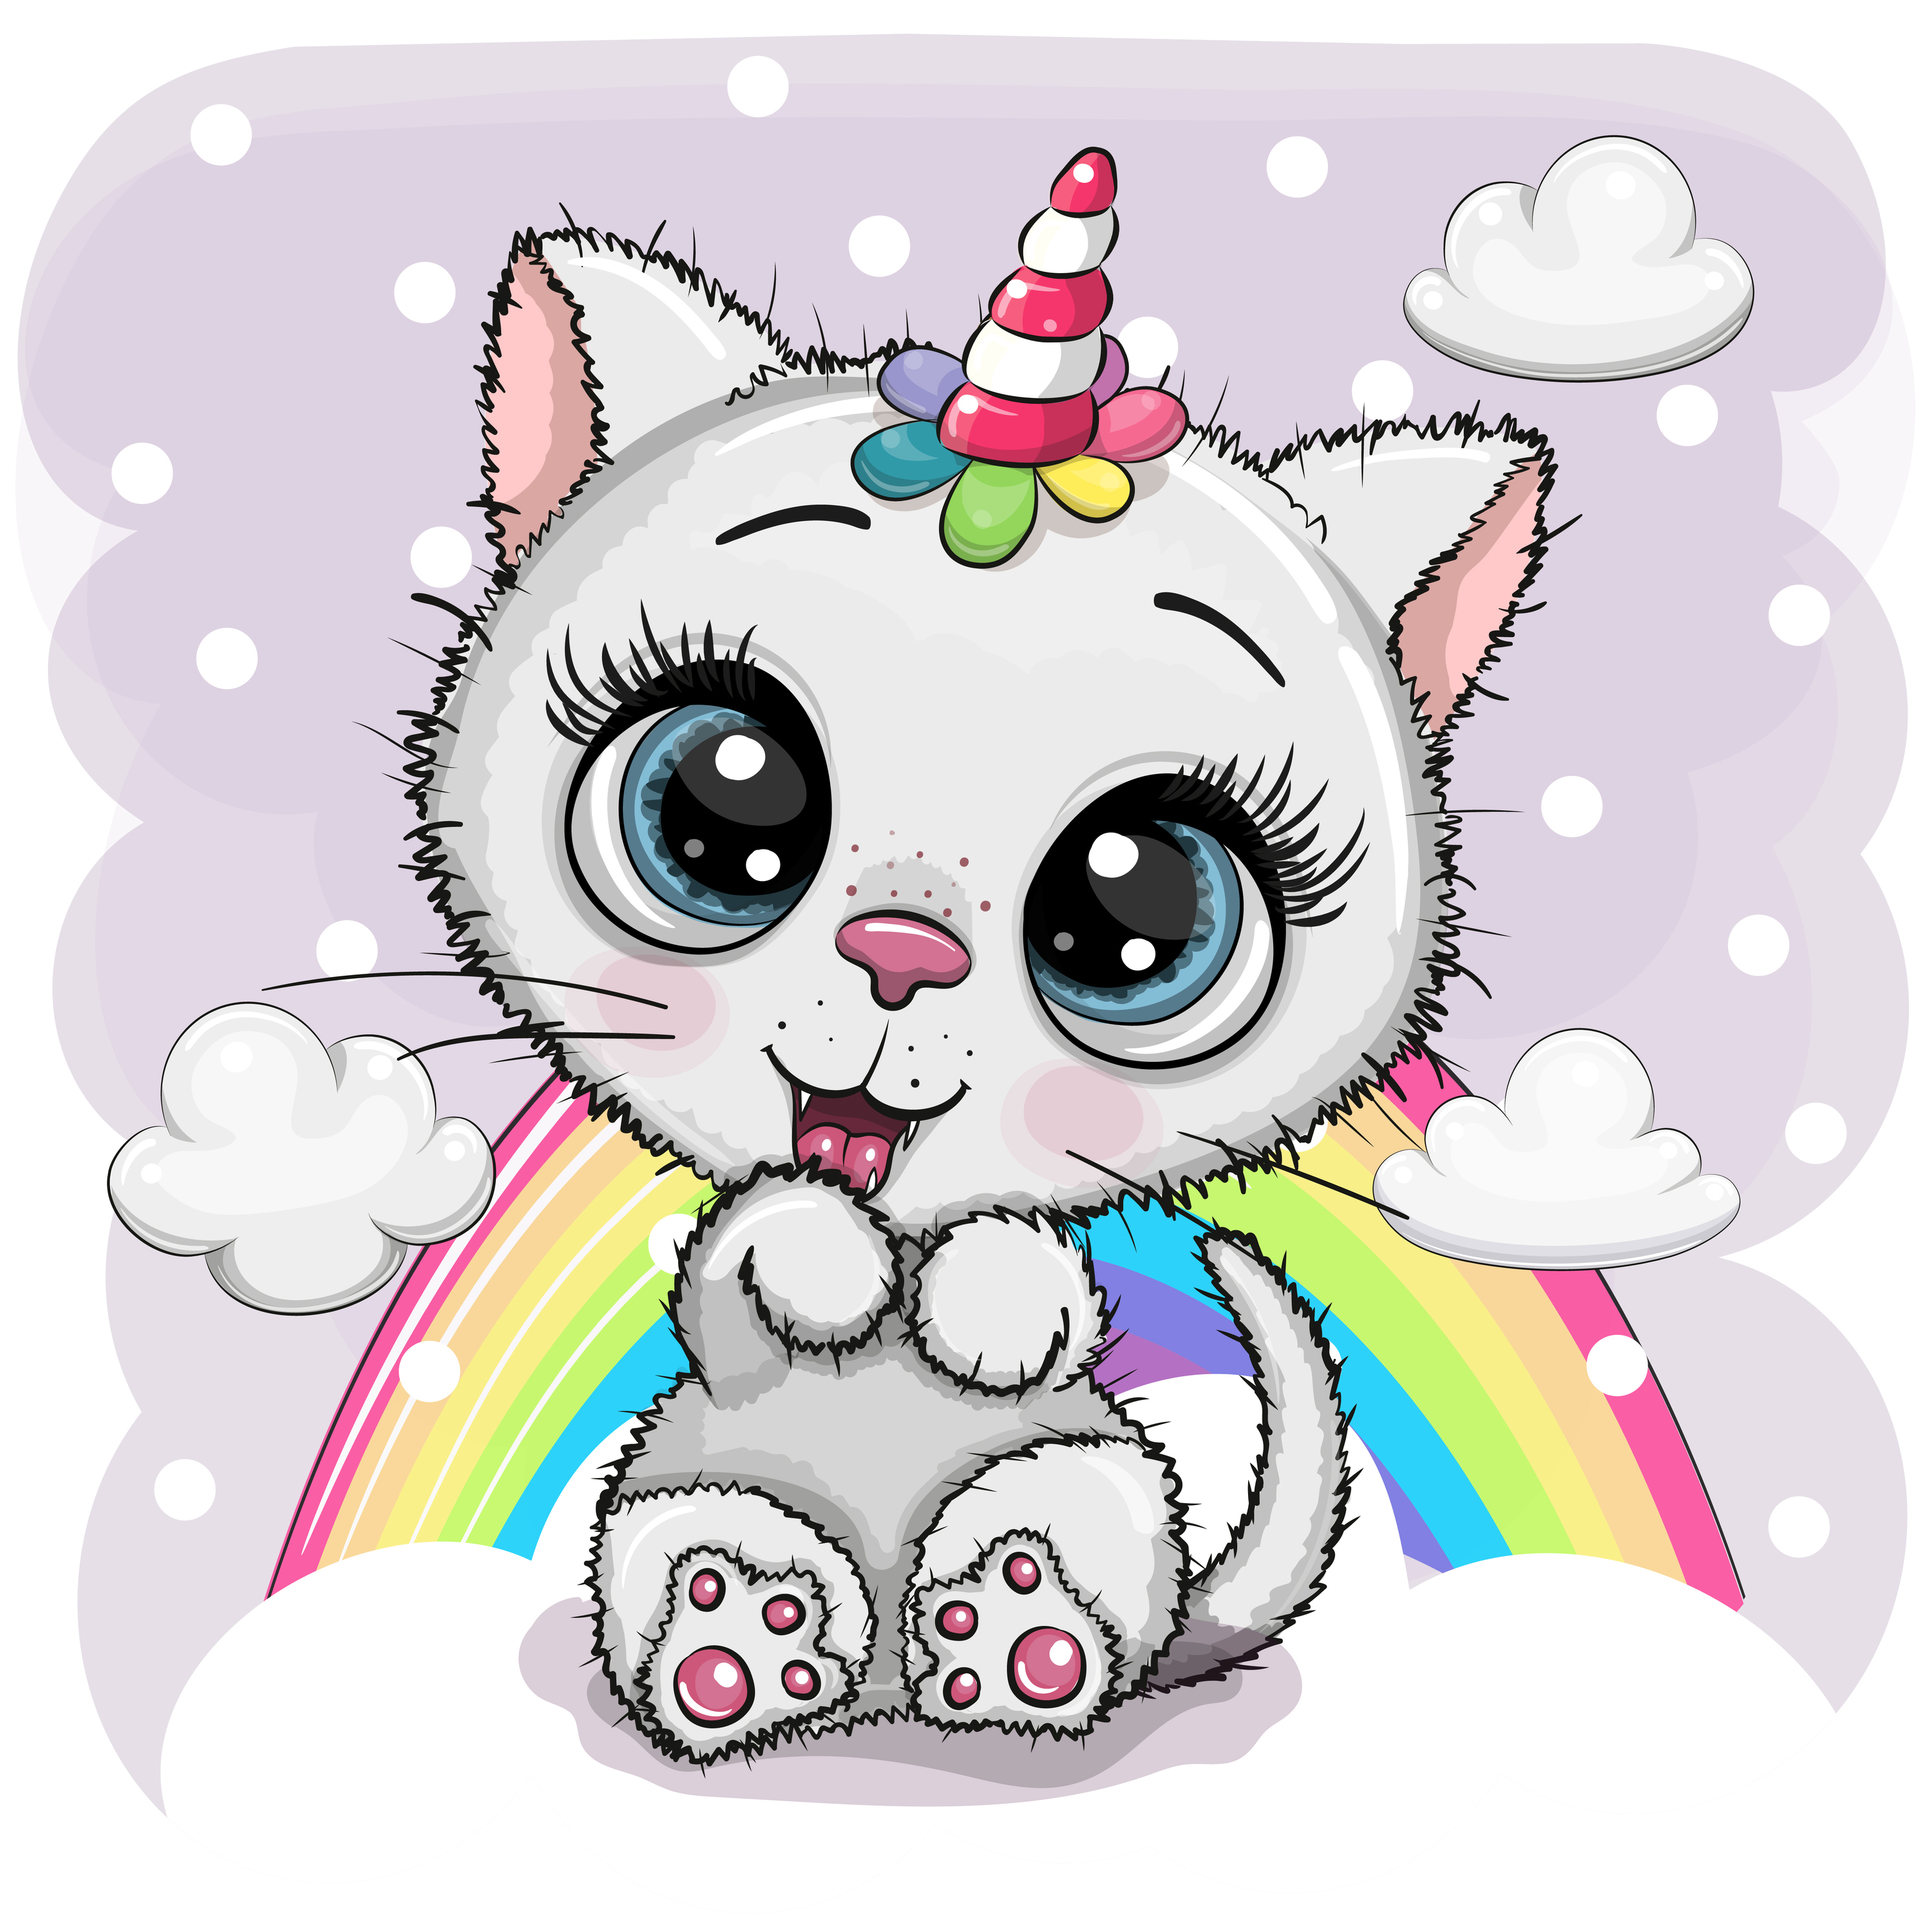 Cute Cartoon White Kitten With The Horn Of A Unicorn On Clouds - Kramer